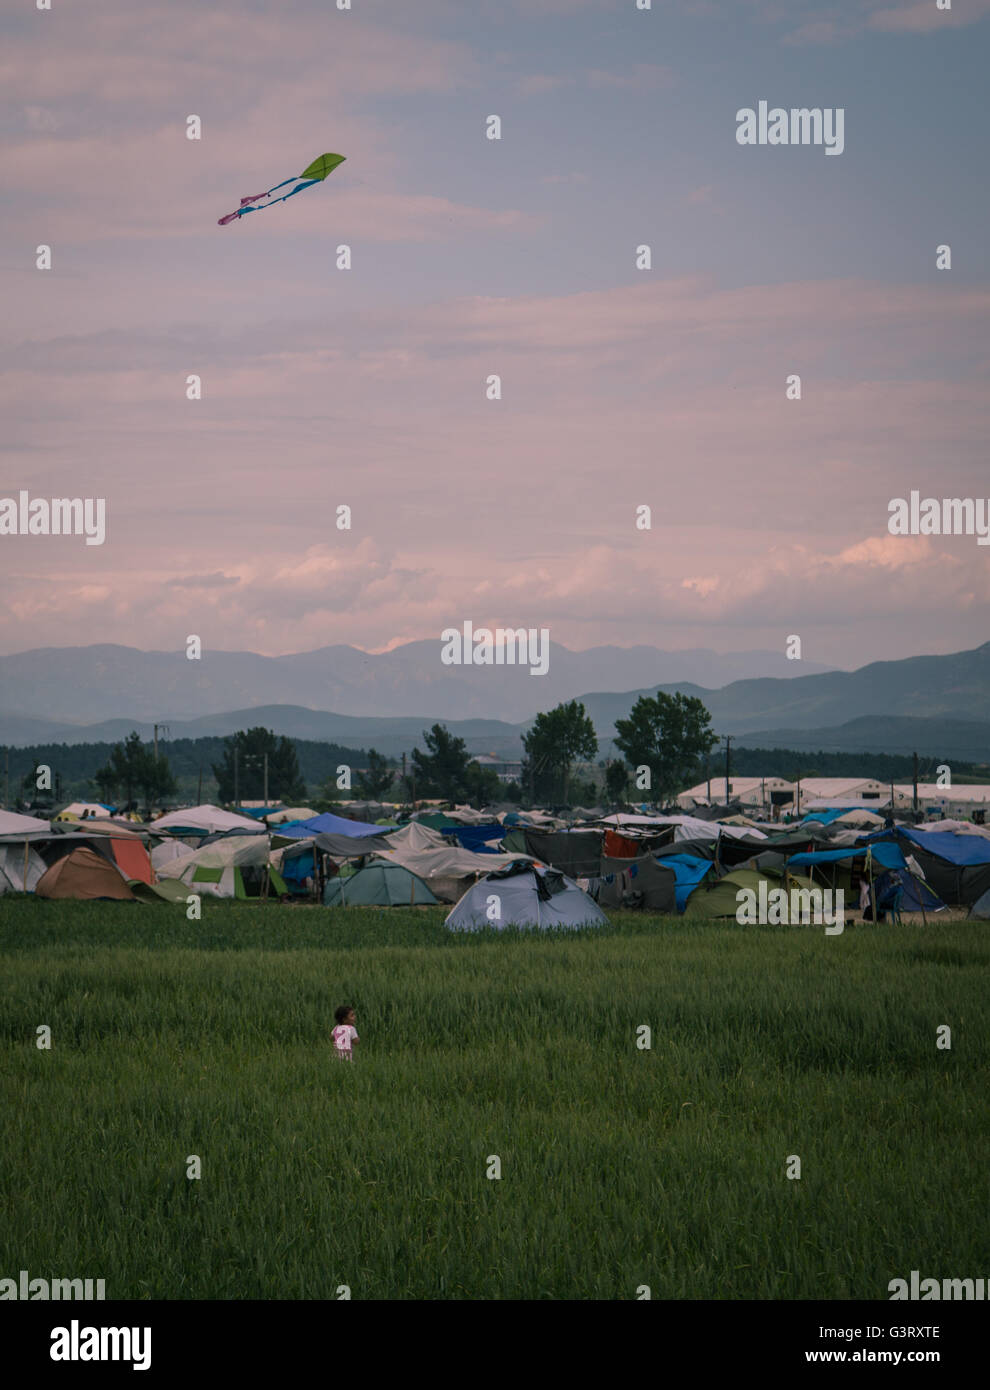 A young Syrian refugee child flies a kite in the fields of Idomeni refugee camp in Greece, near the Macedonian border. Stock Photo